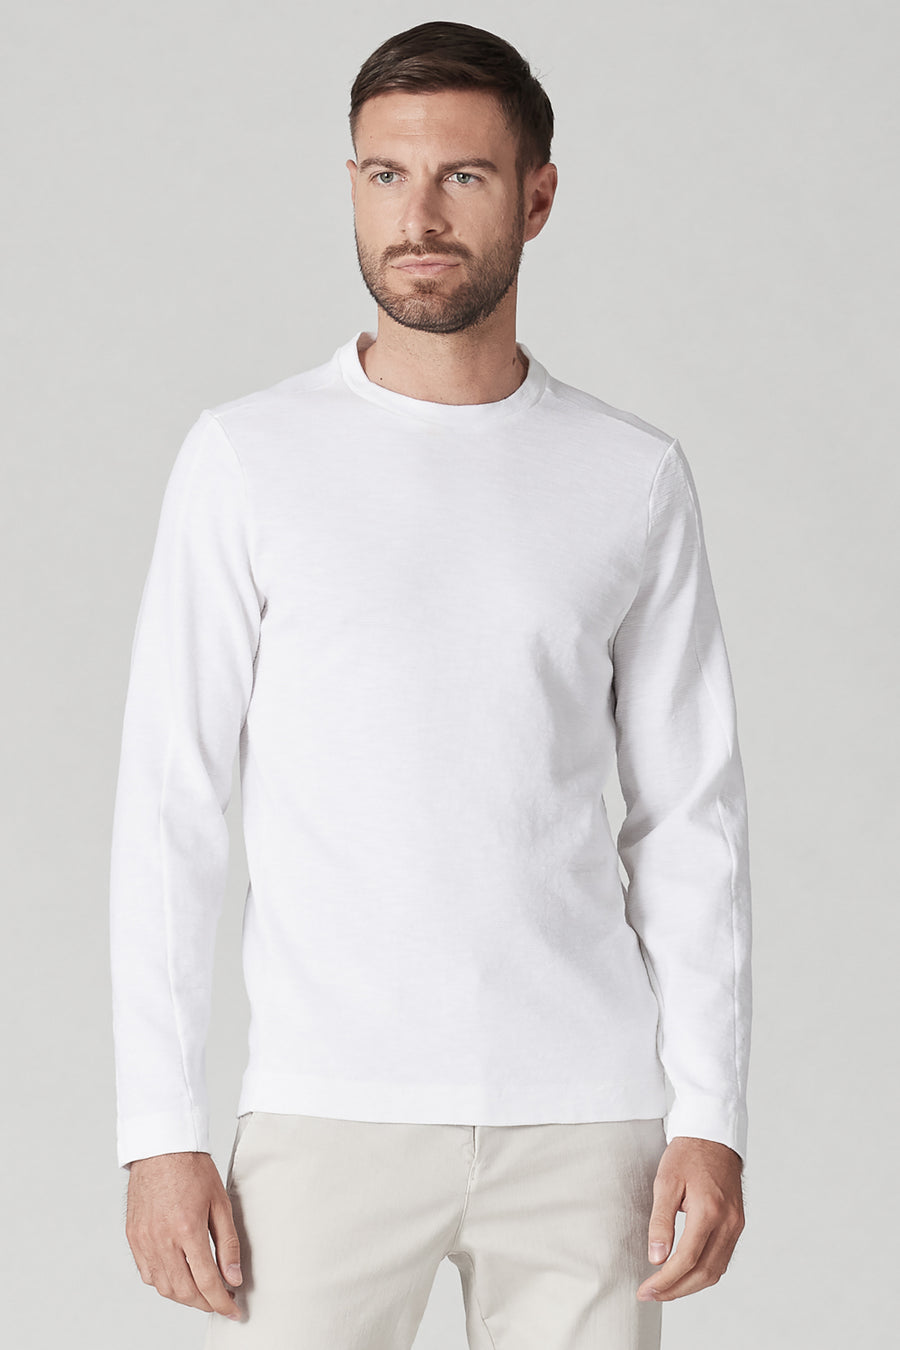 Buy the Transit Italian Cotton Textured Sweatshirt in White at Intro. Spend £50 for free UK delivery. Official stockists. We ship worldwide.